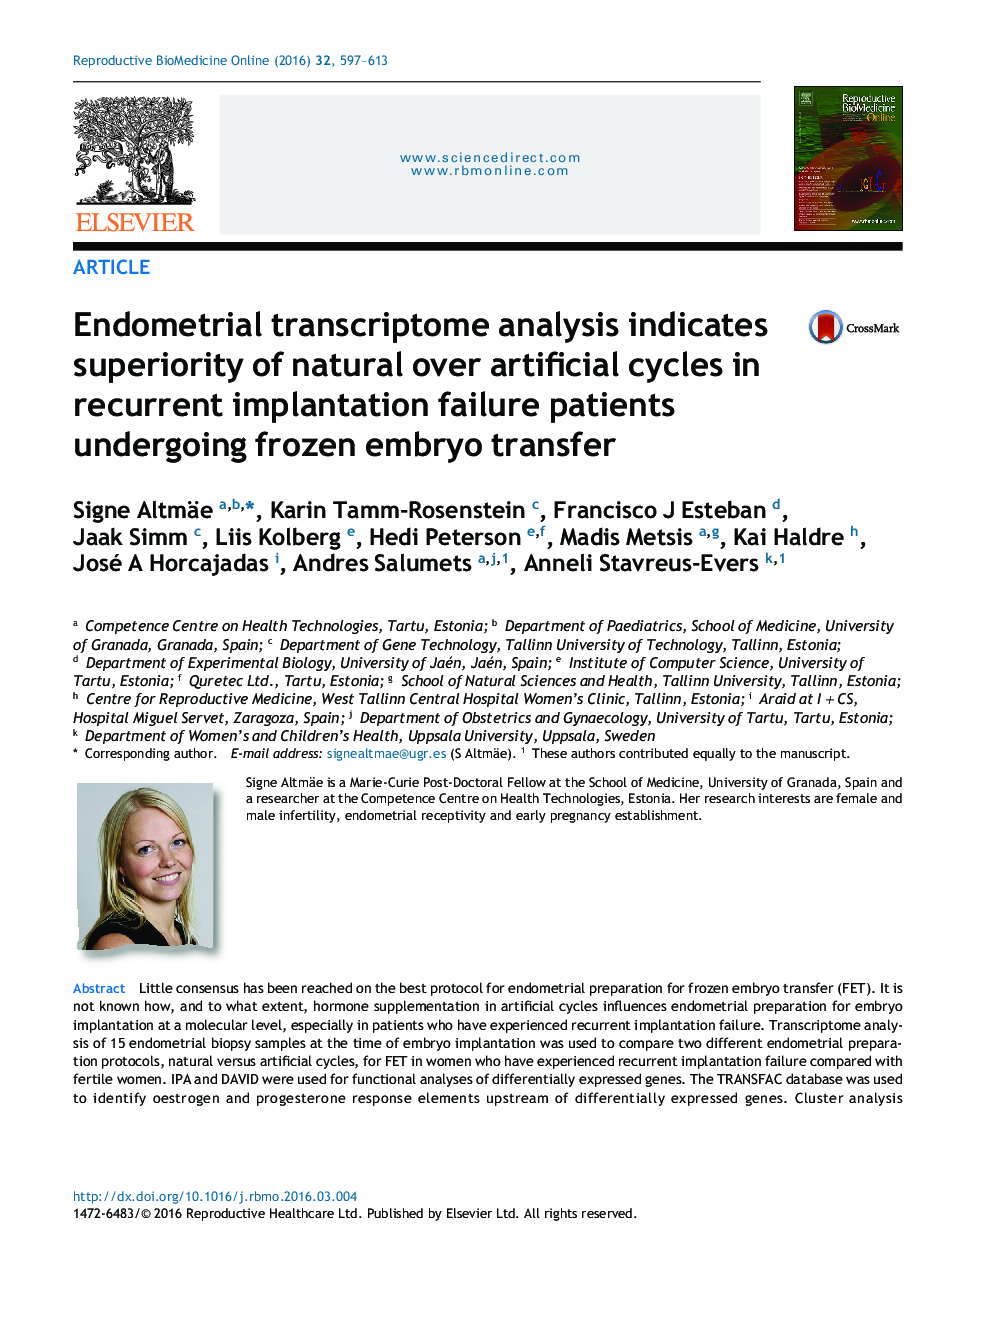 Endometrial transcriptome analysis indicates superiority of natural over artificial cycles in recurrent implantation failure patients undergoing frozen embryo transfer